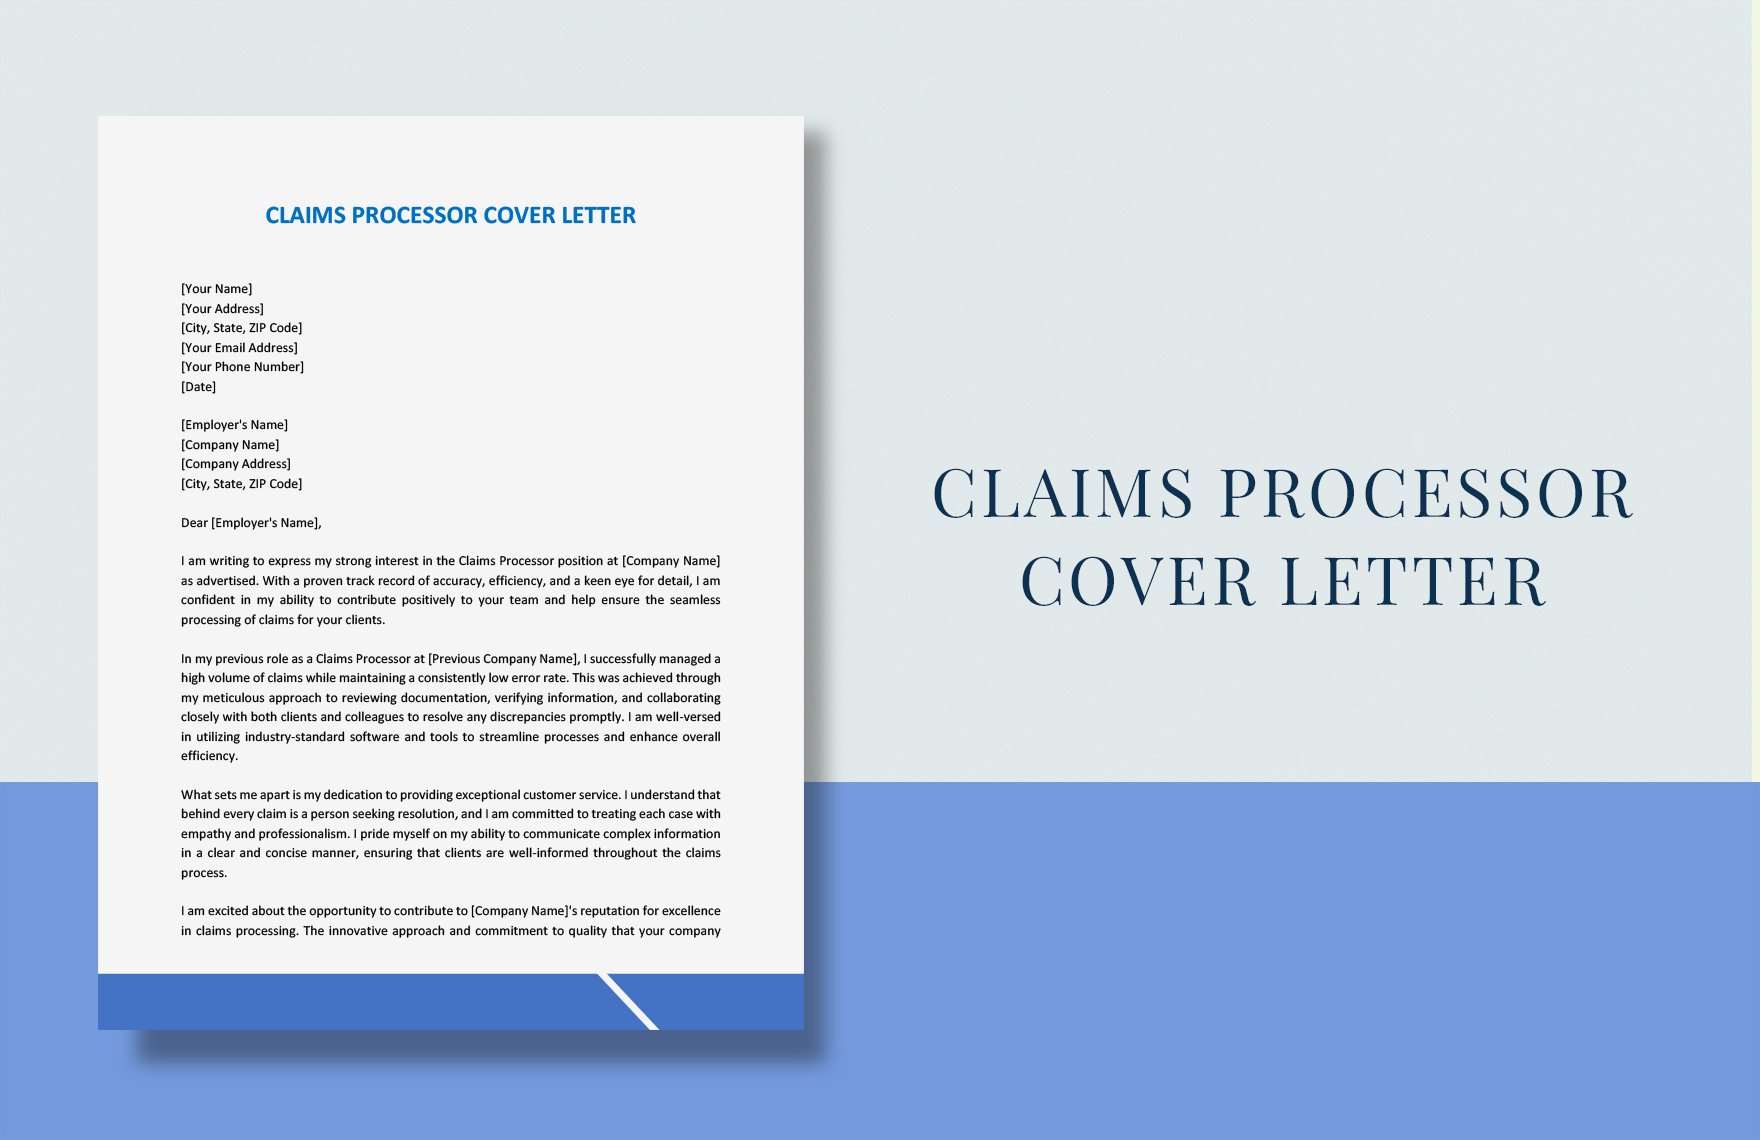 Claims Processor Cover Letter in Word, Google Docs, PDF